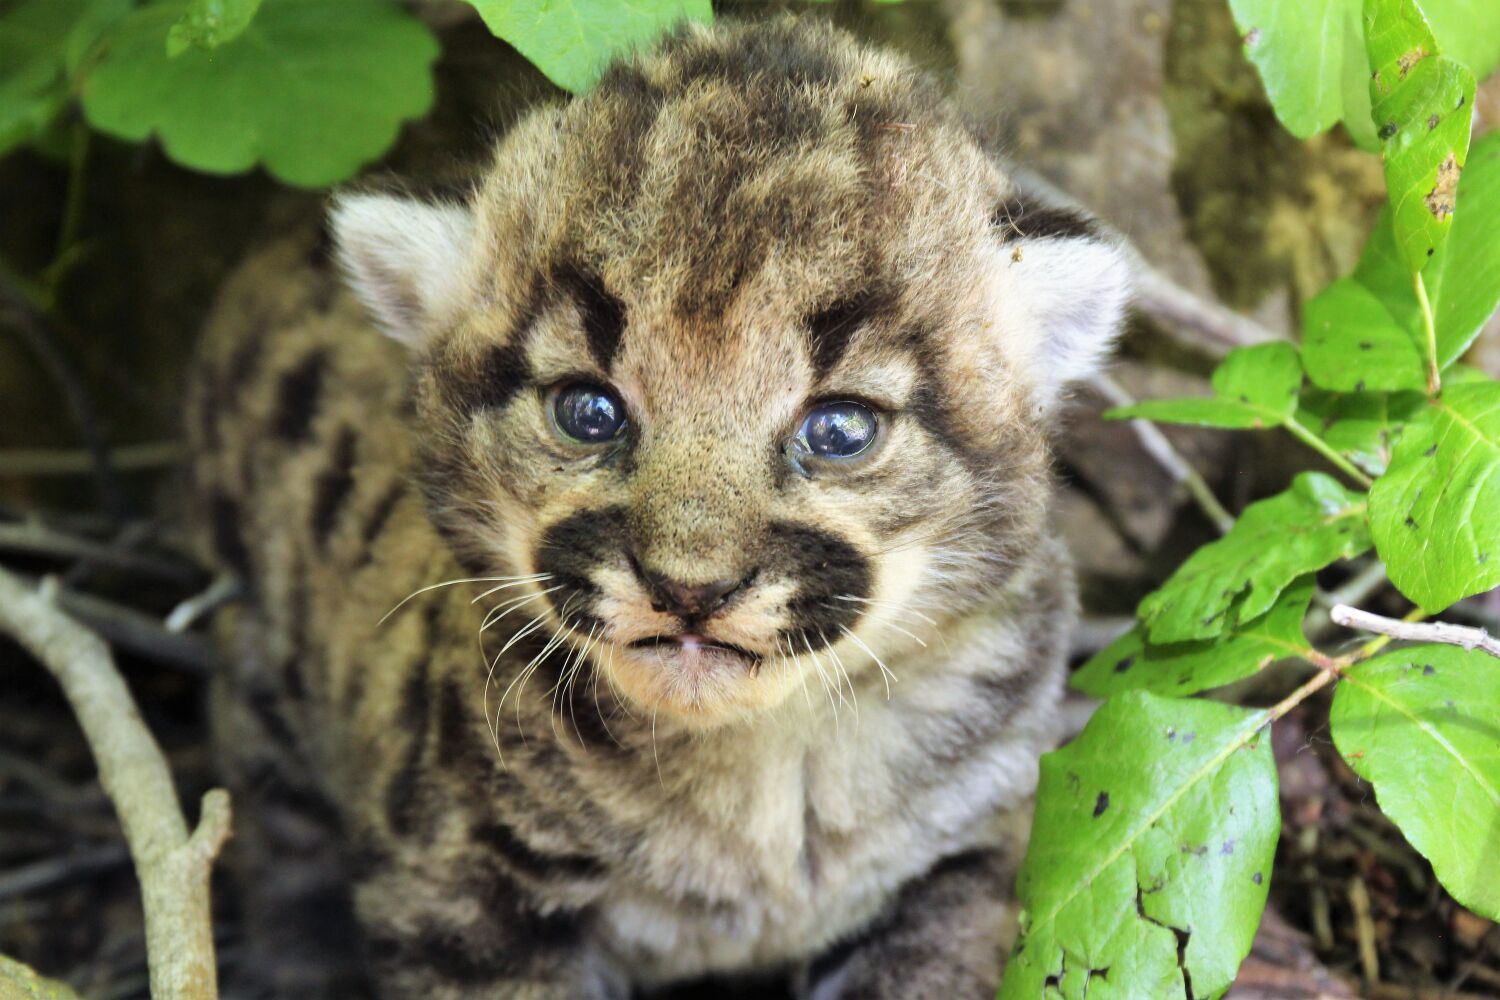 Editorial: We can give mountain lion kittens an easier life than P-22 had